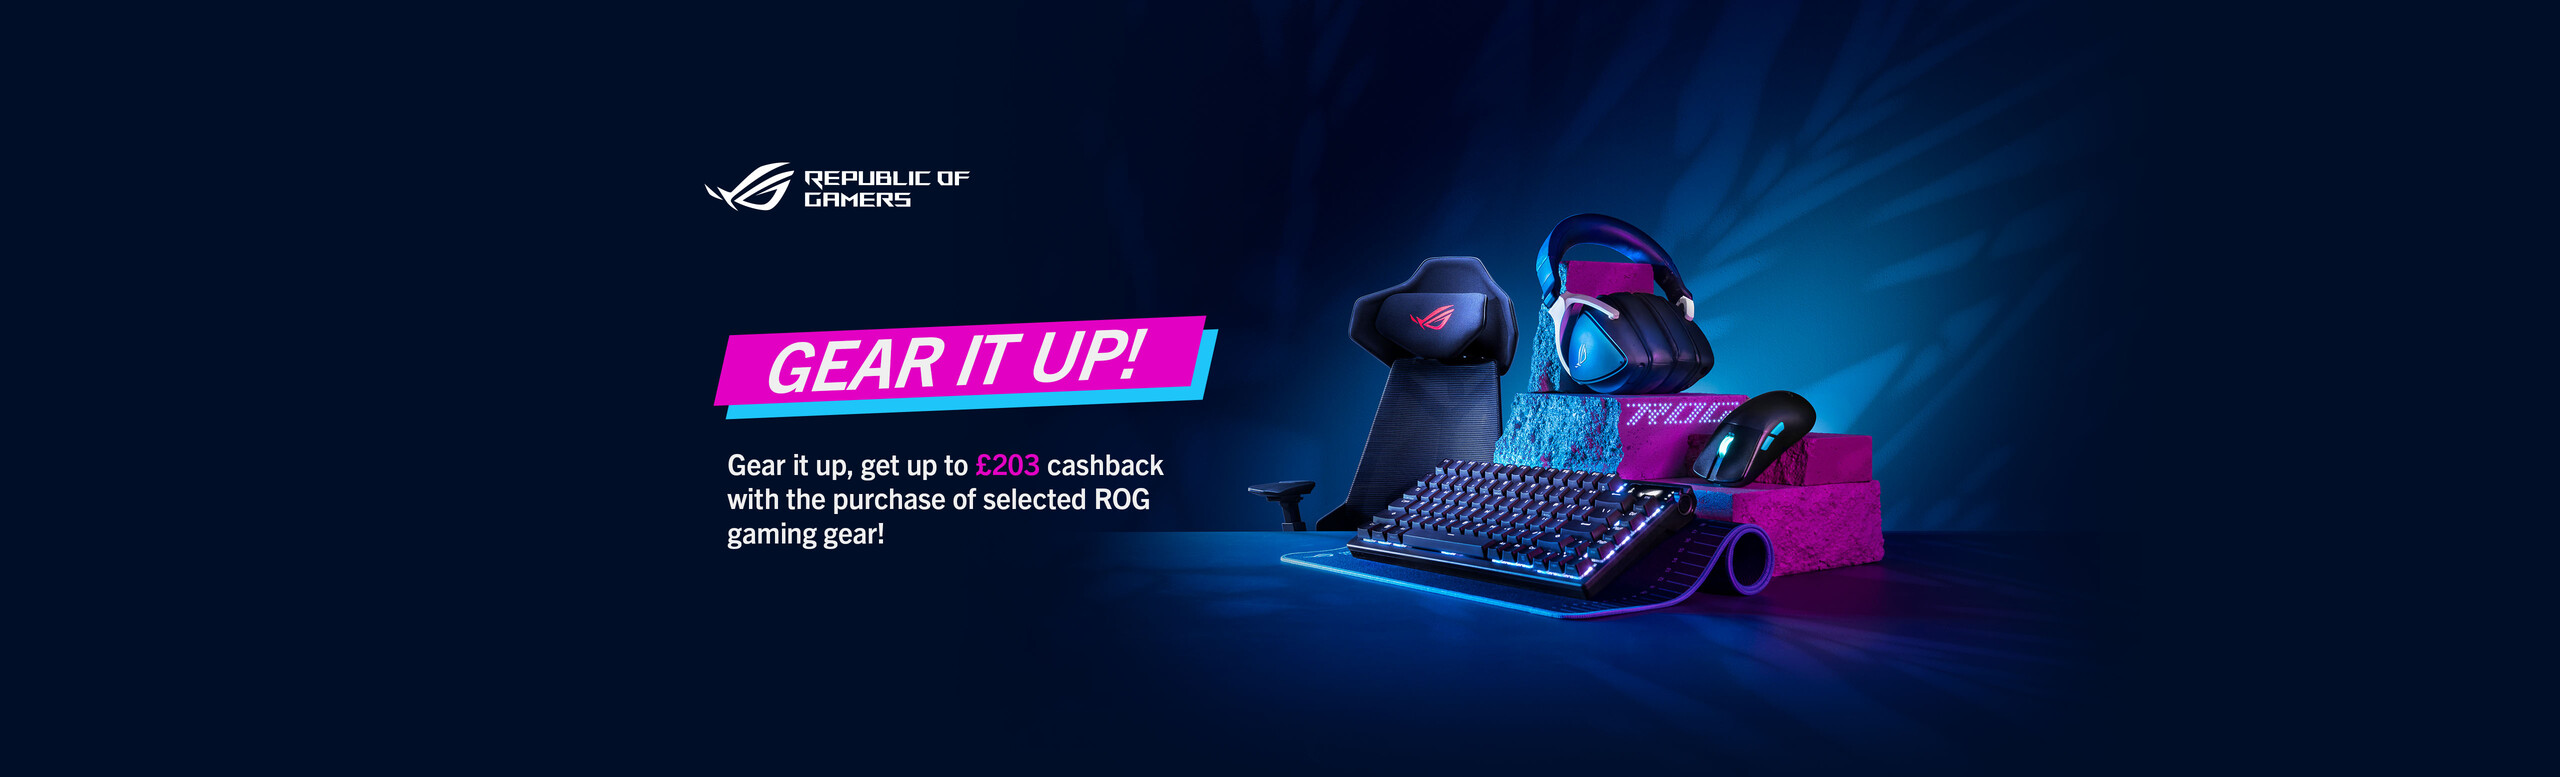 Get up to £203 cashback with the purchase of select ROG gaming gear!